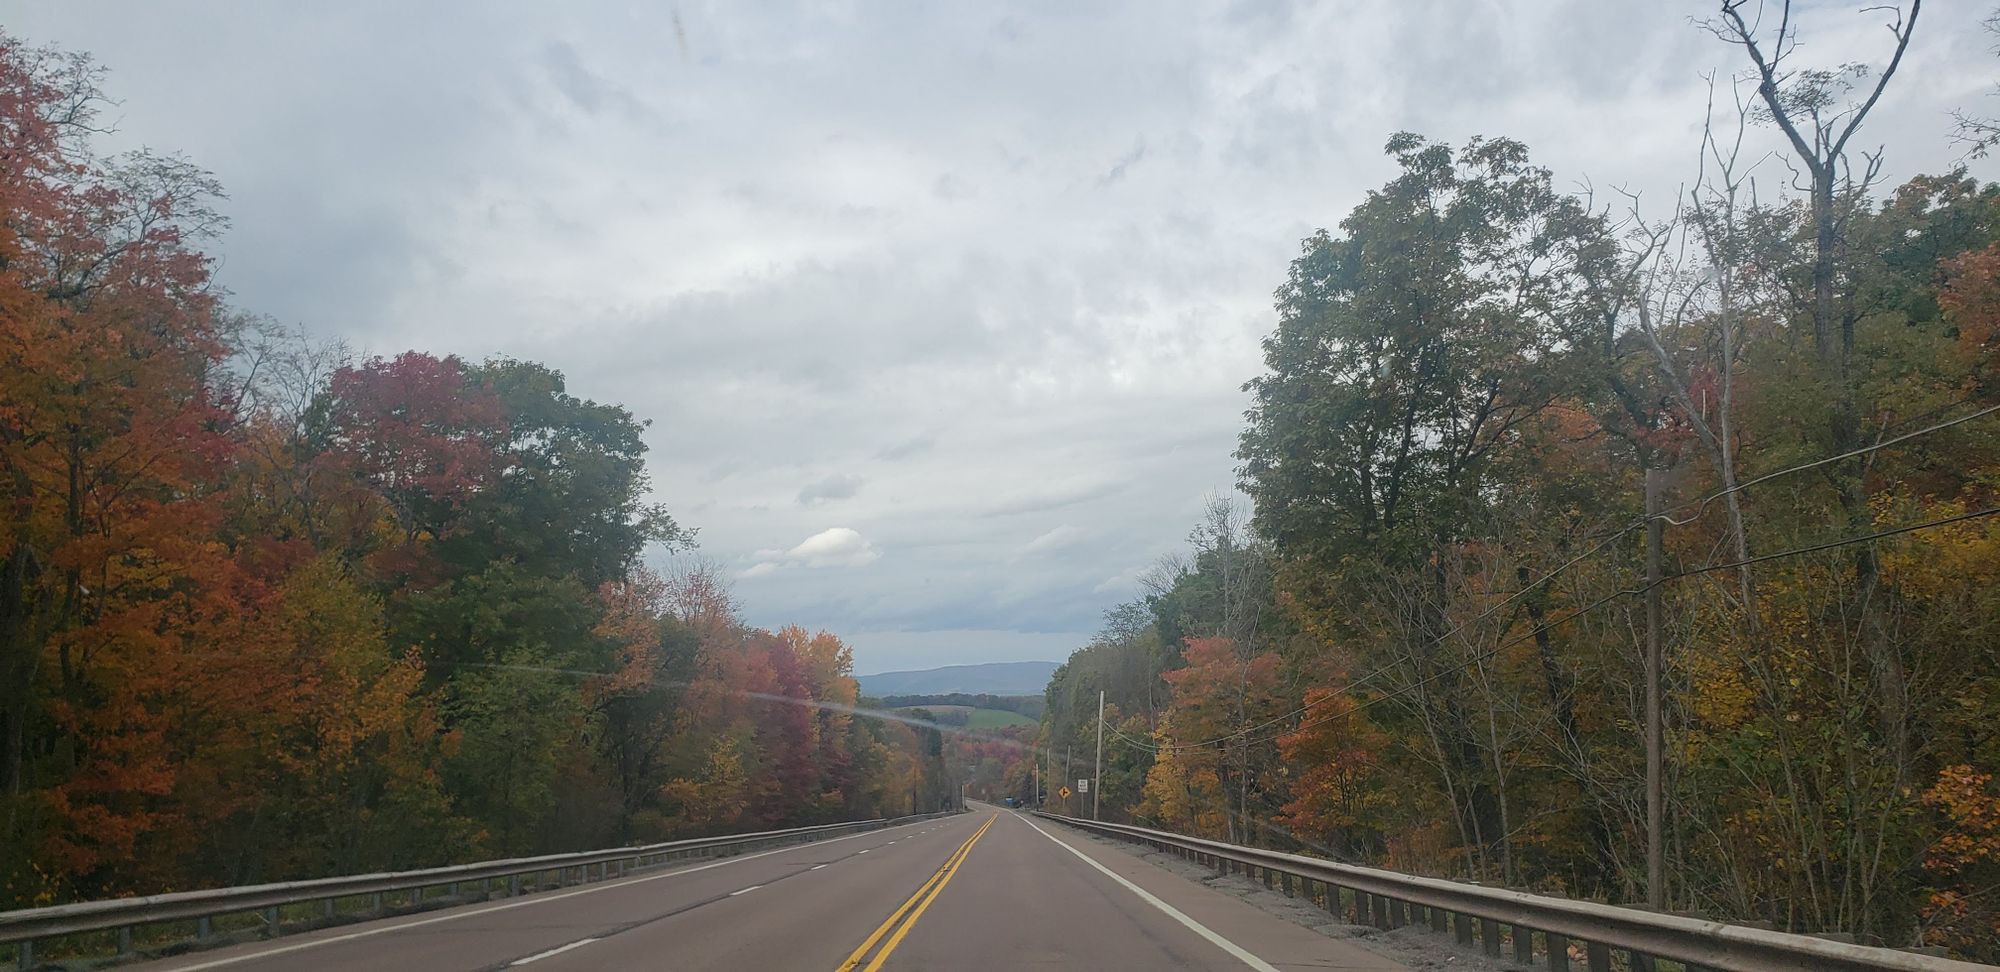 A picture of Highway 40, the National Pike, in the fall.